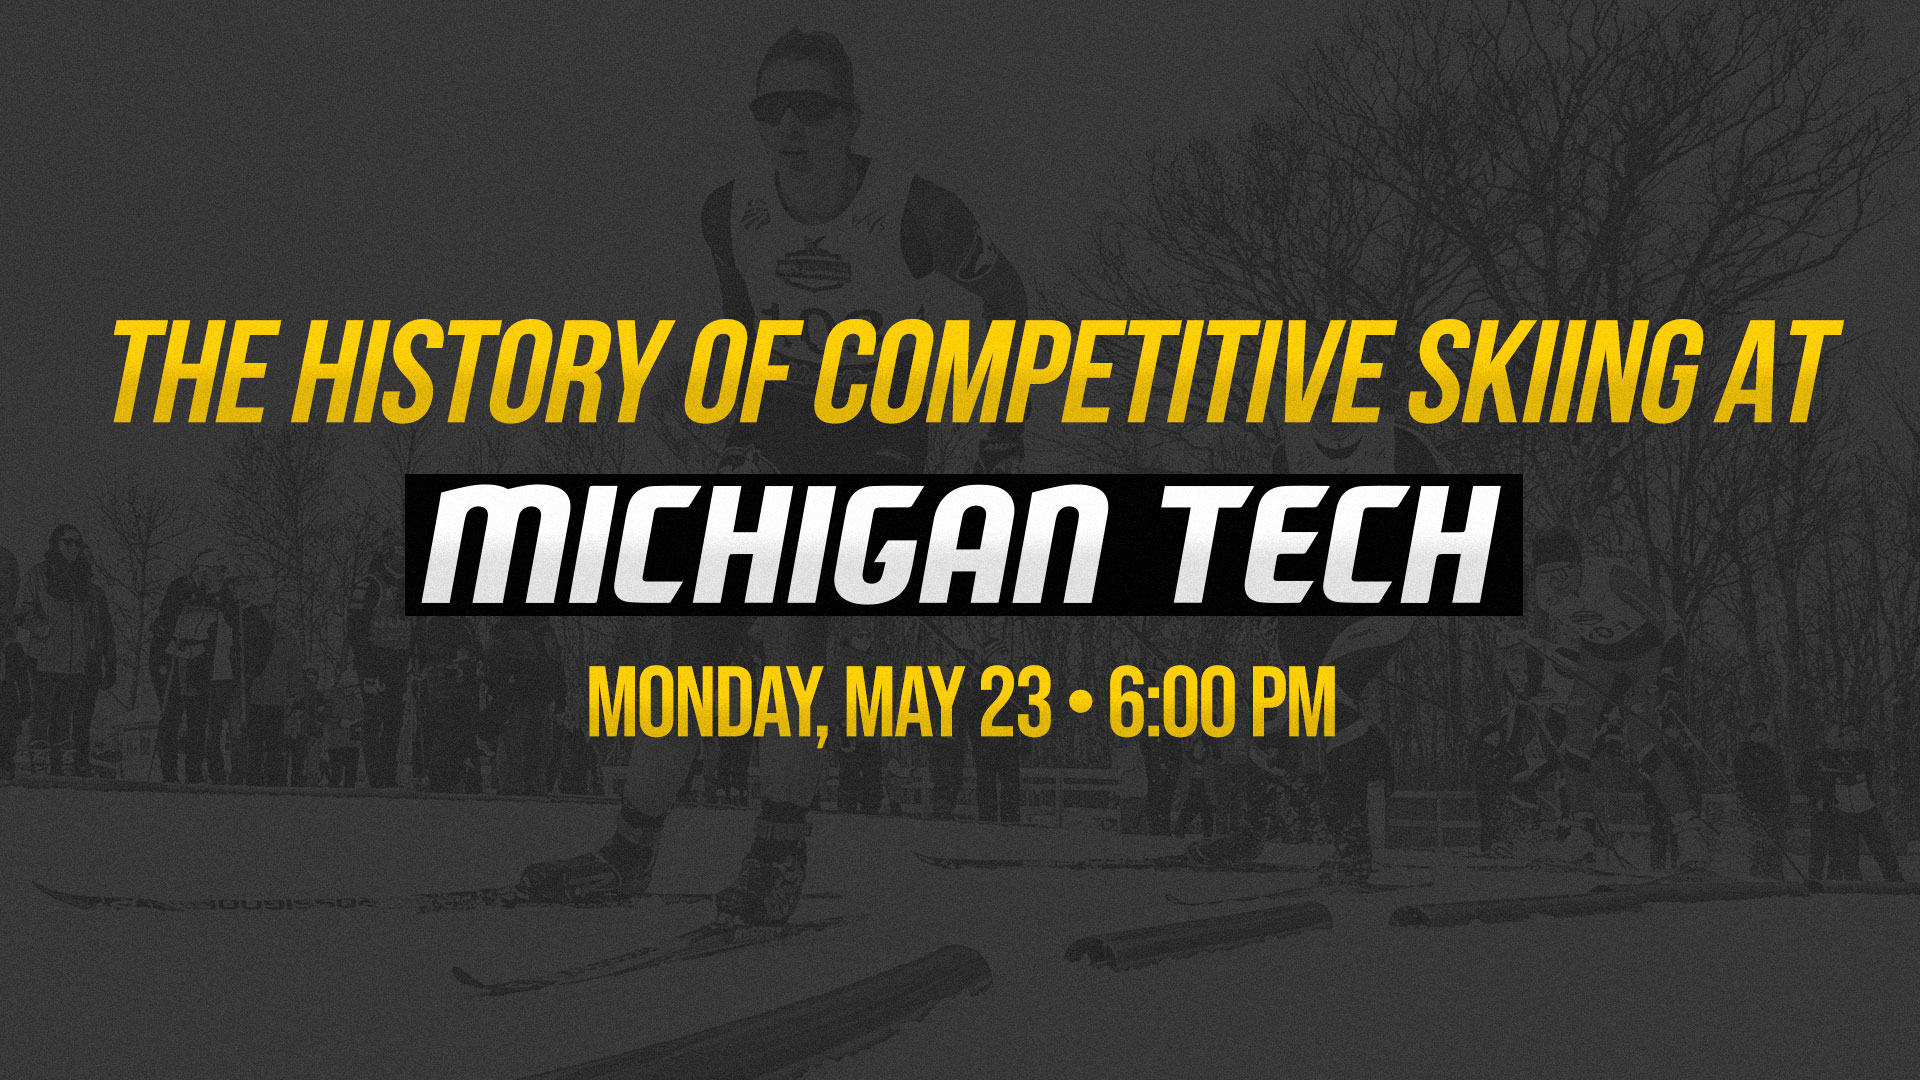 Register for Monday’s History of Skiing at Michigan Tech presentation